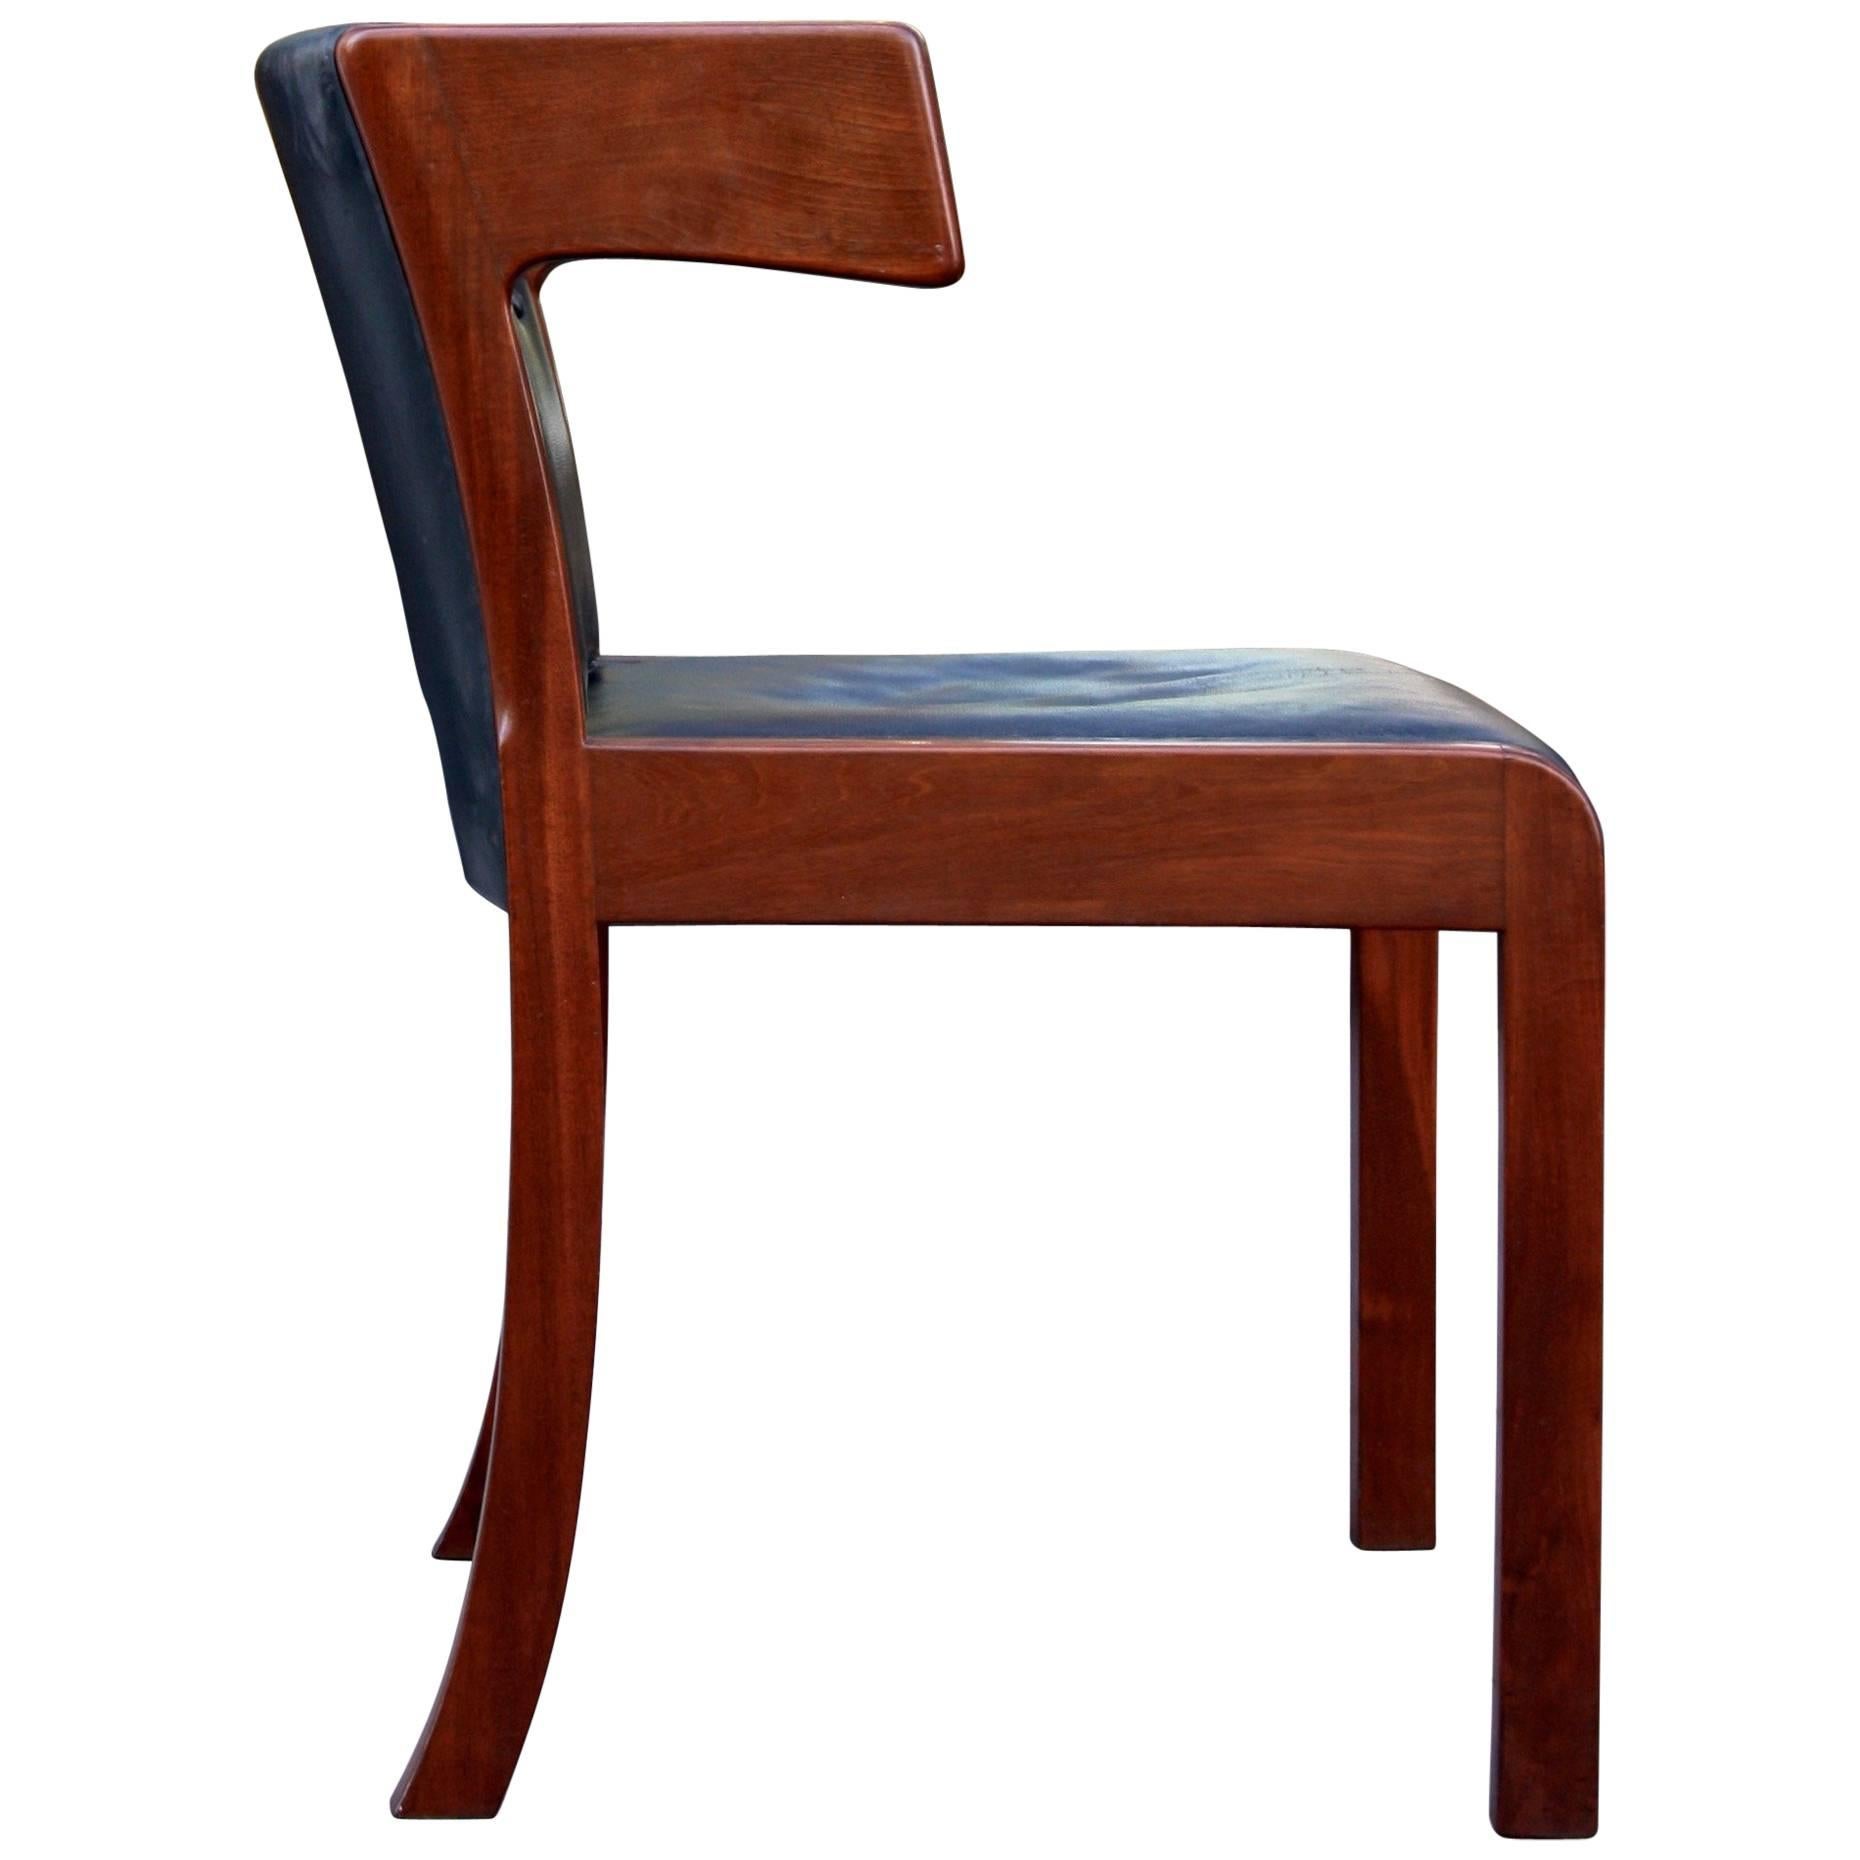 Ole Wanscher Mid-20th Century Winged Mahogany Side Chair